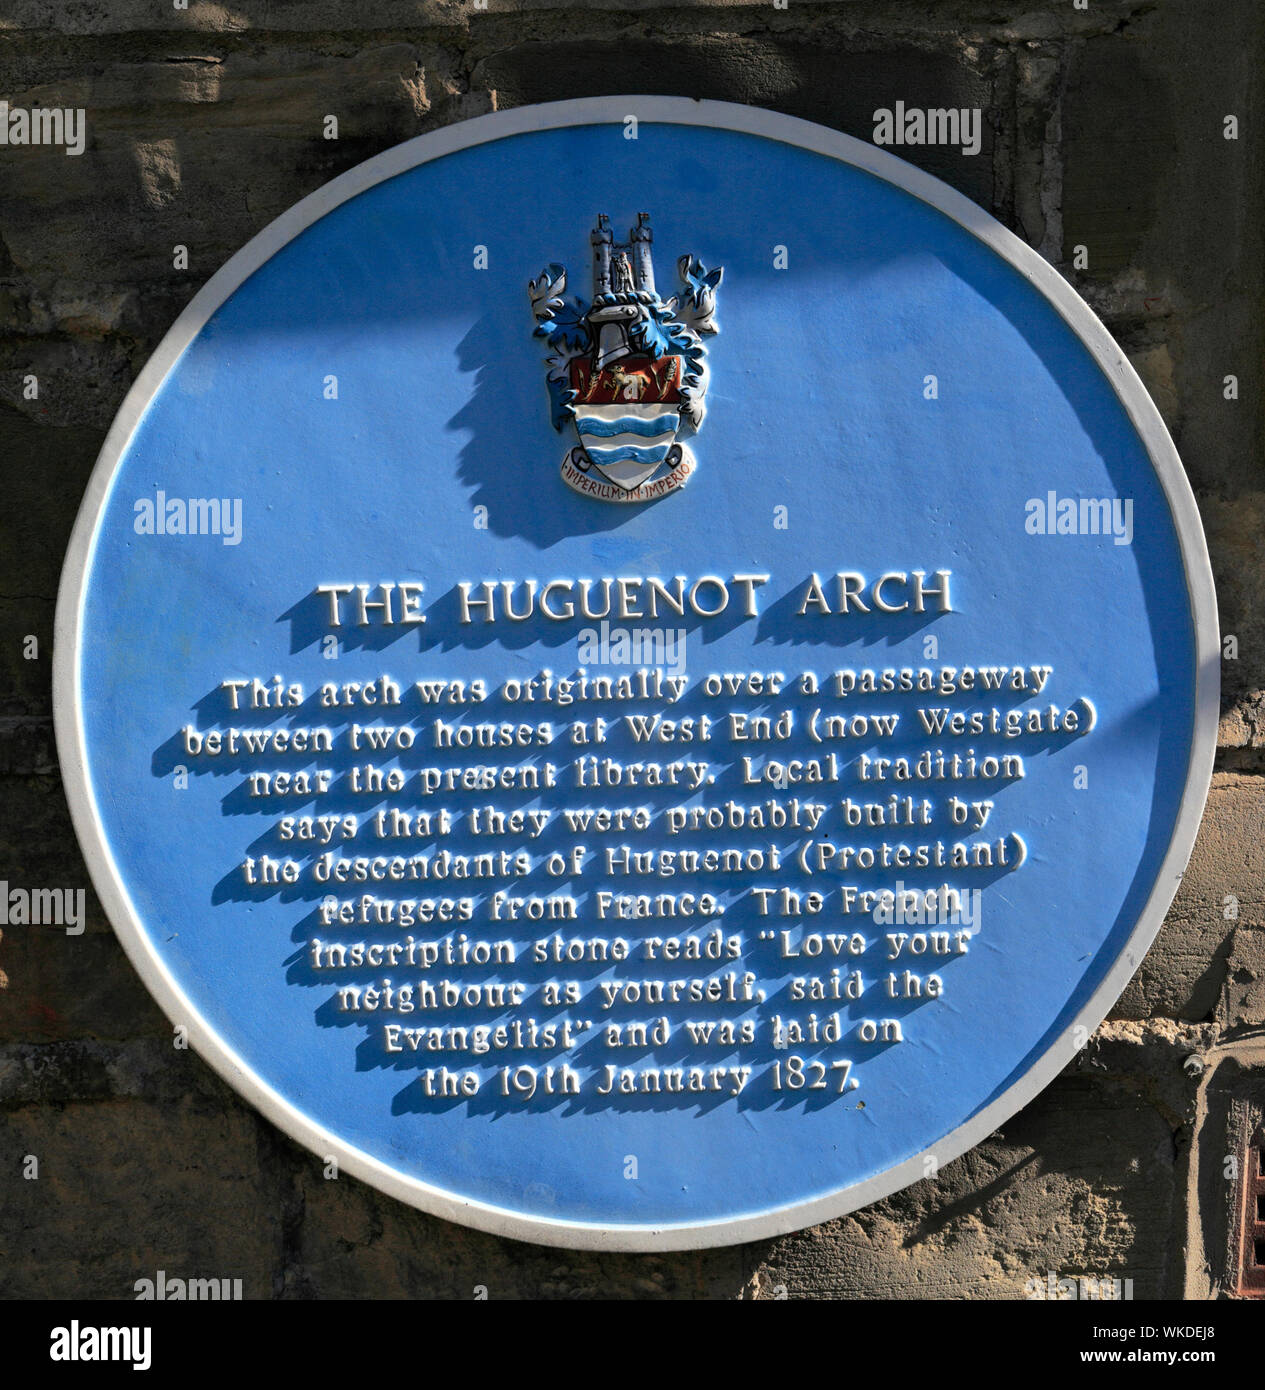 The Huguenot arch plaque, Garden of rest, Wetherby town, North Yorkshire, England, UK Stock Photo